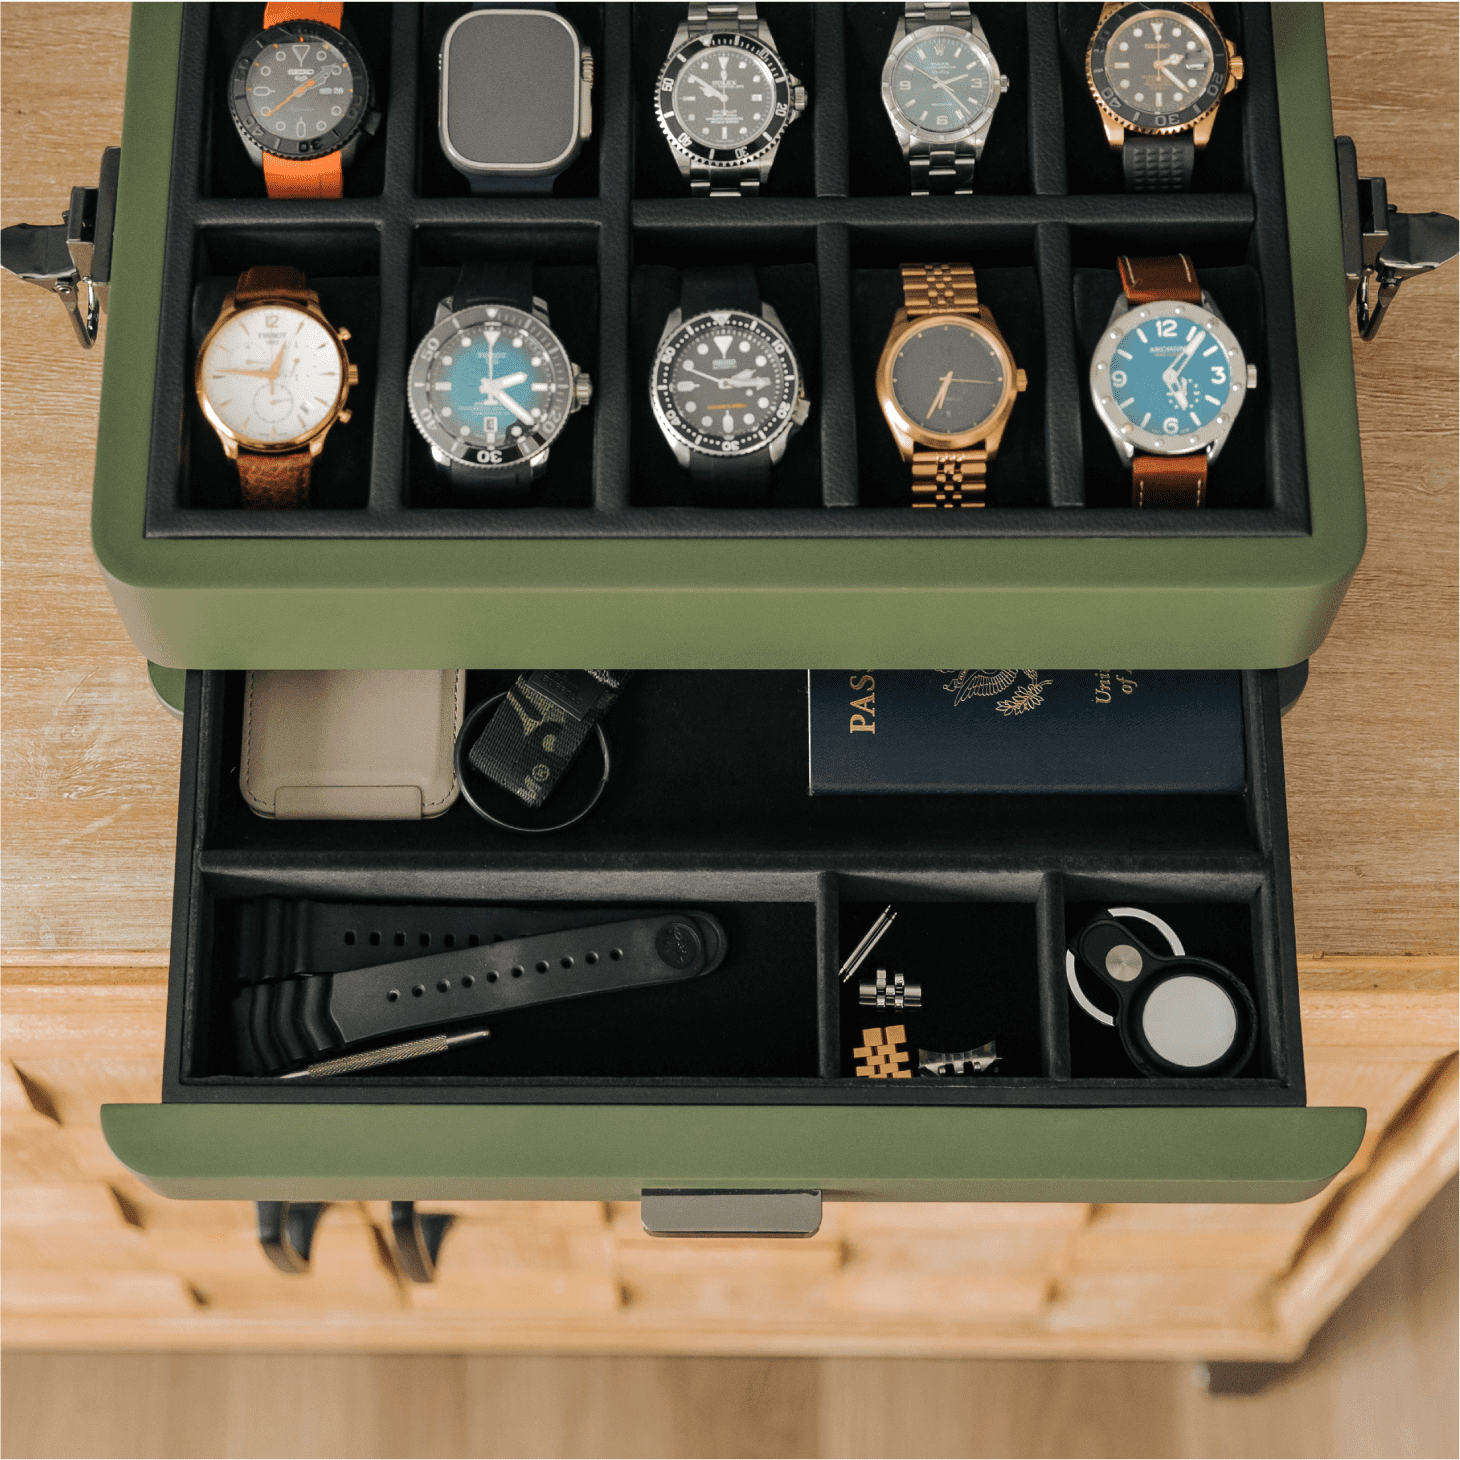 BEST Watch Boxes Under $100 (ON AMAZON) - YouTube